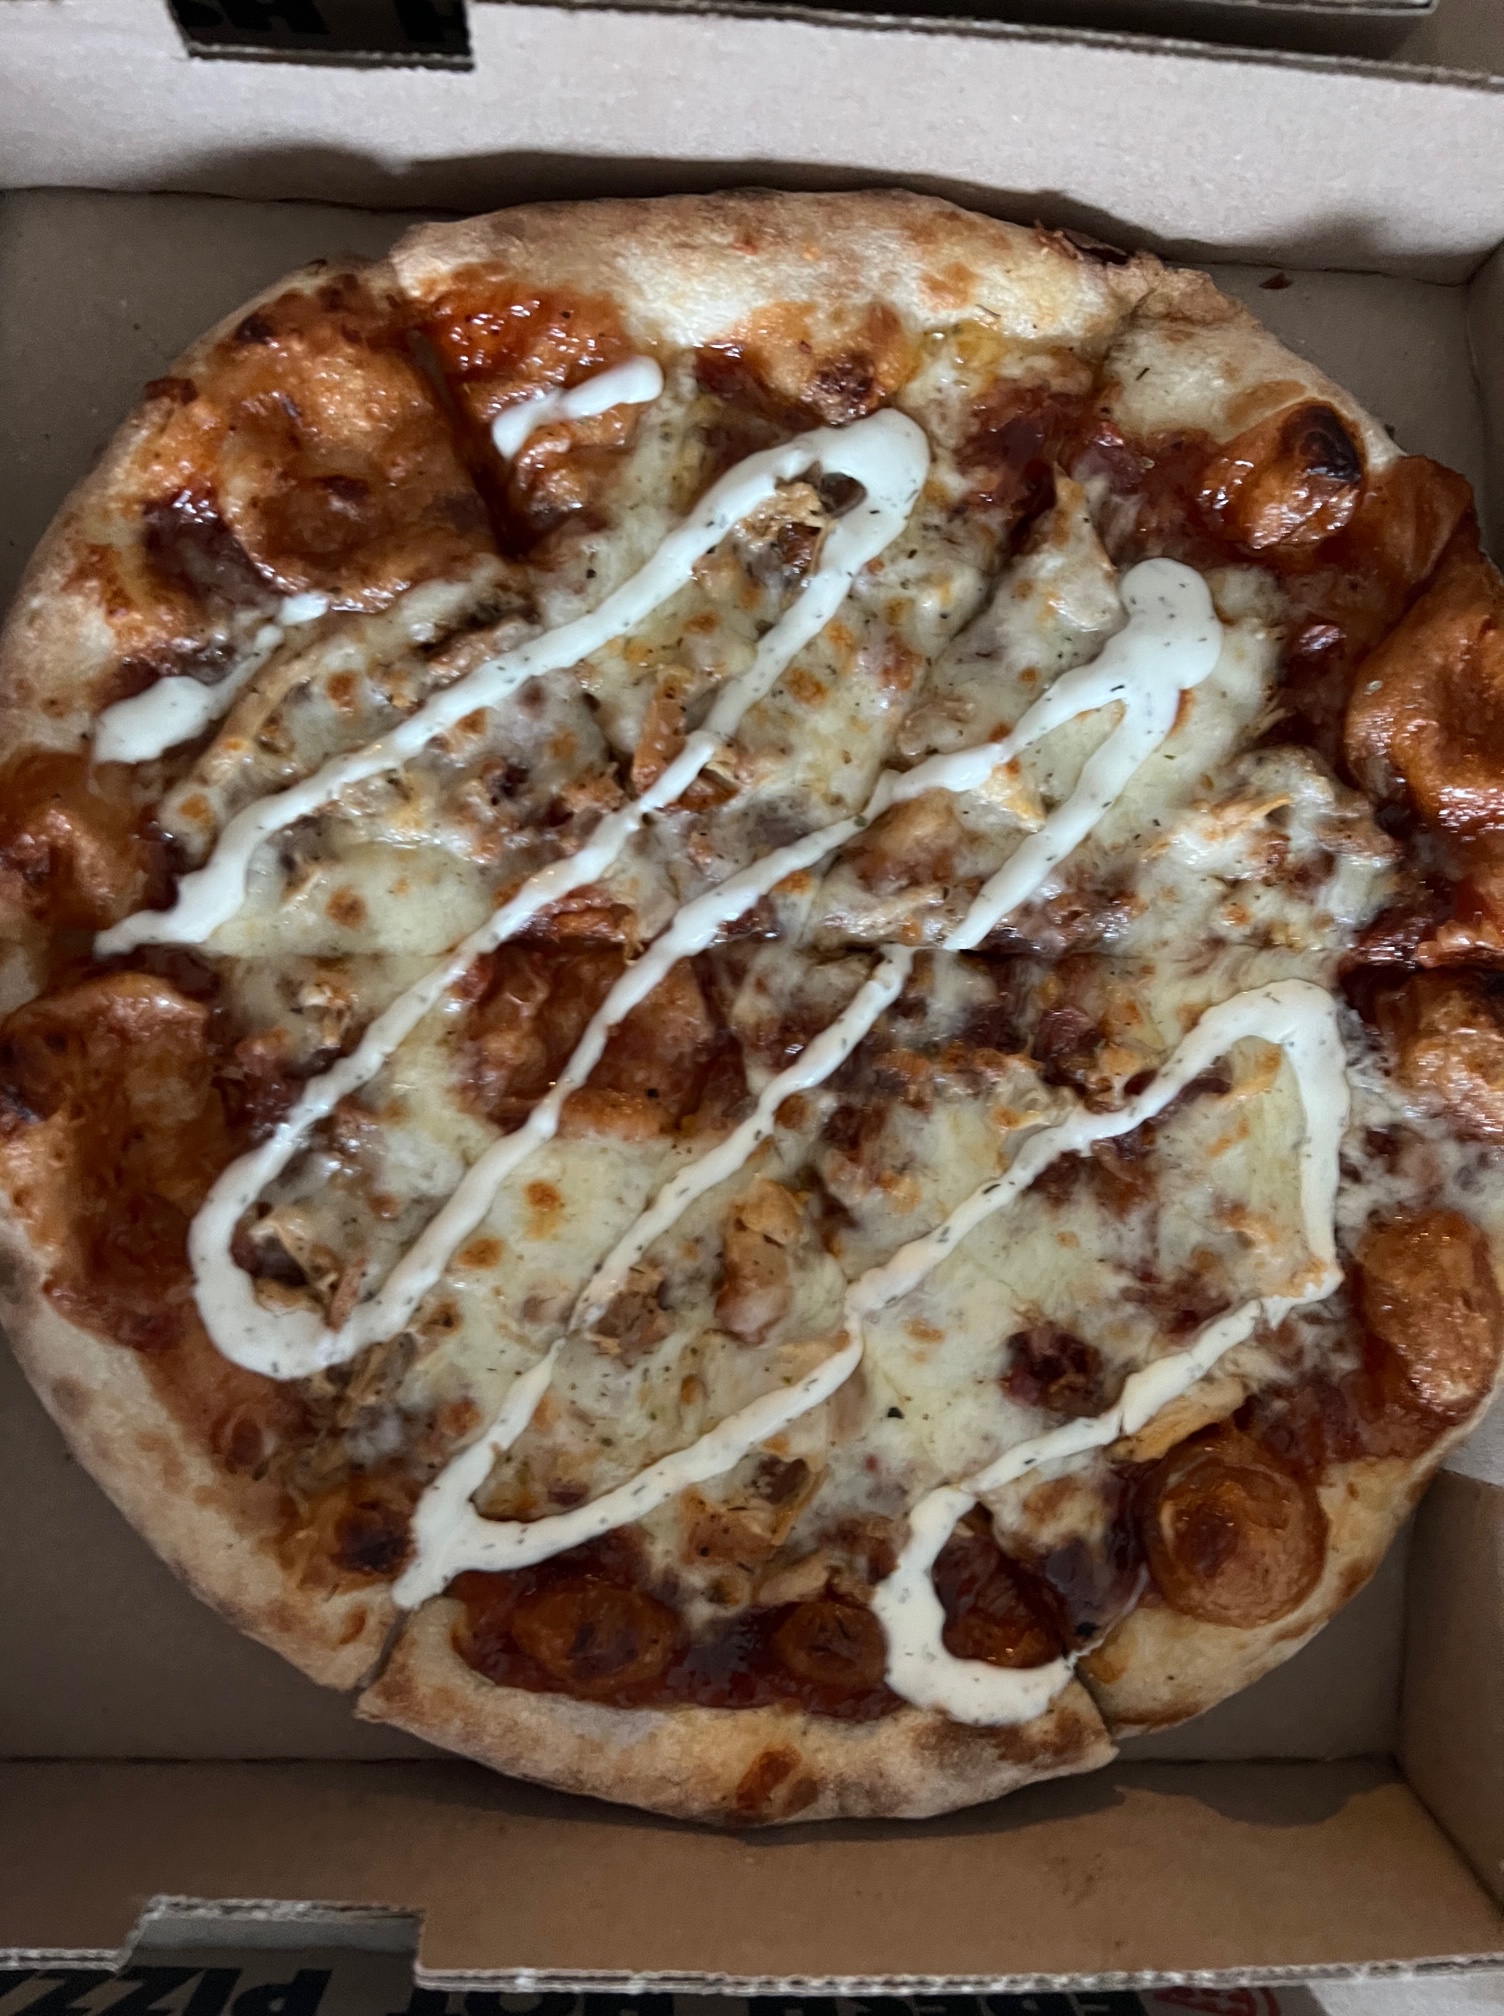 In a pizza box, there is a barbecue chicken pizza with a ranch drizzle. Photo by Alyssa Buckley.